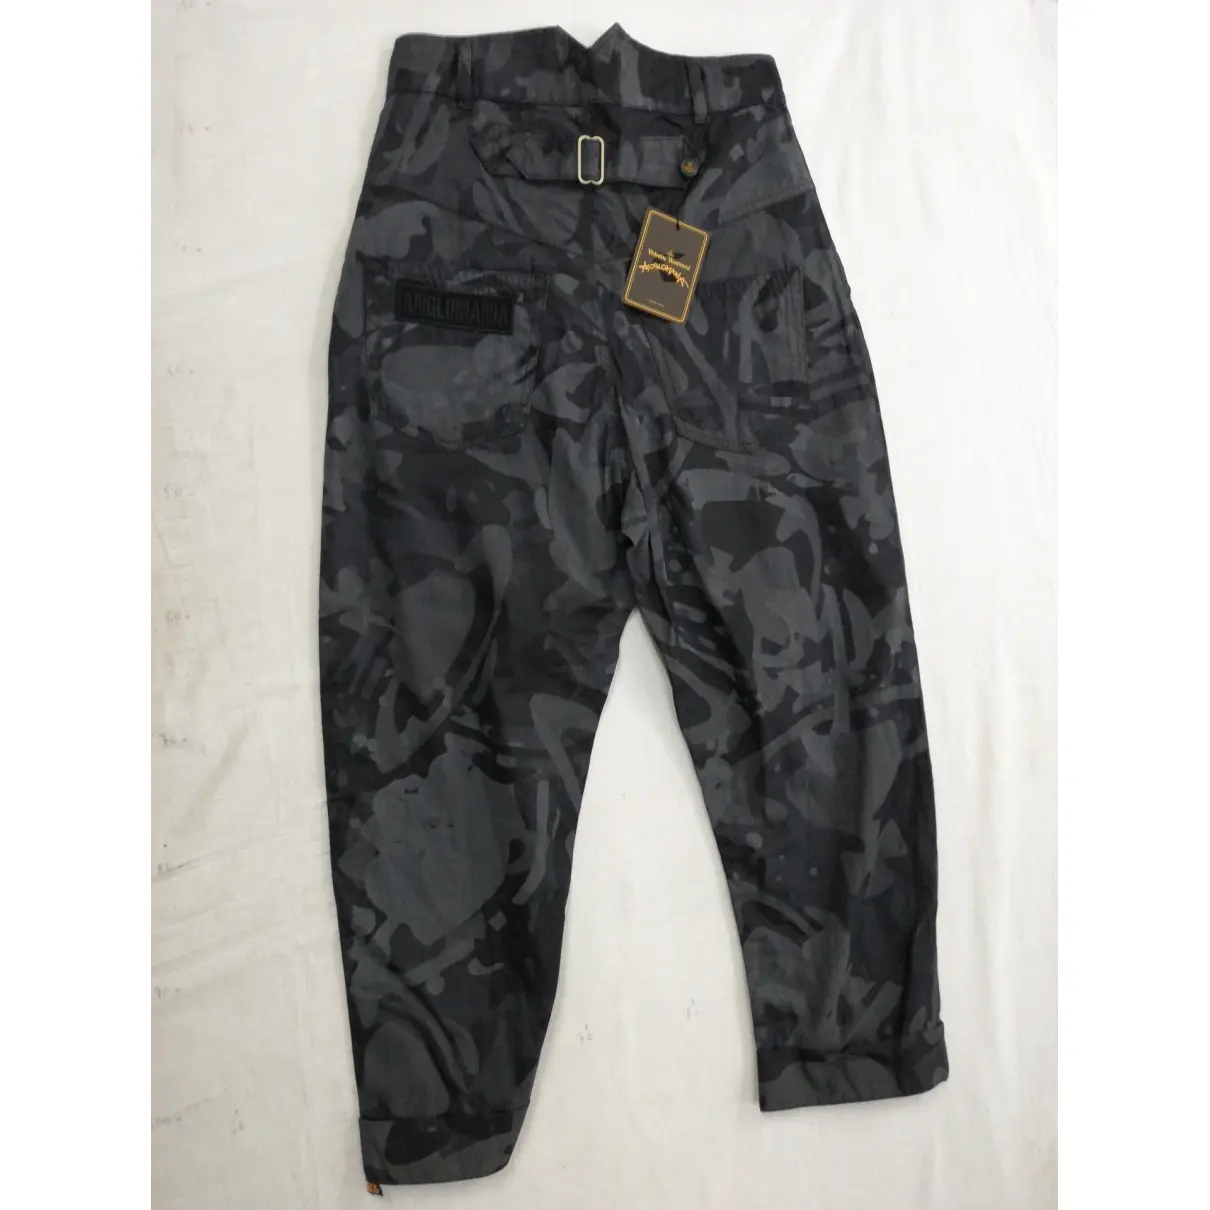 Vivienne Westwood Anglomania Carot pants for sale